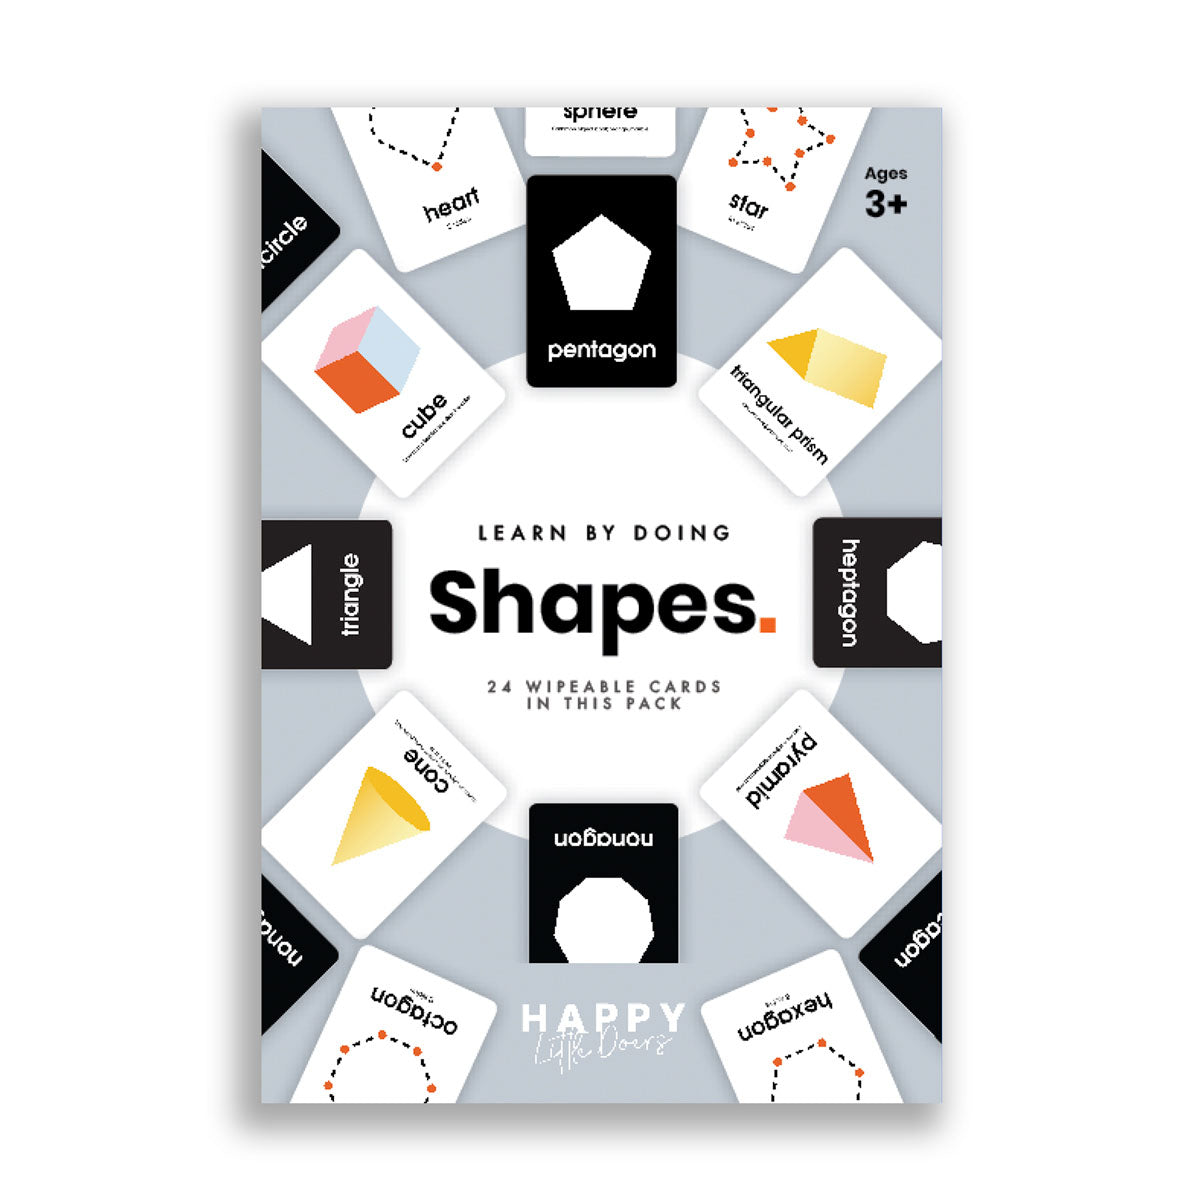 Learn Shapes Flash Cards